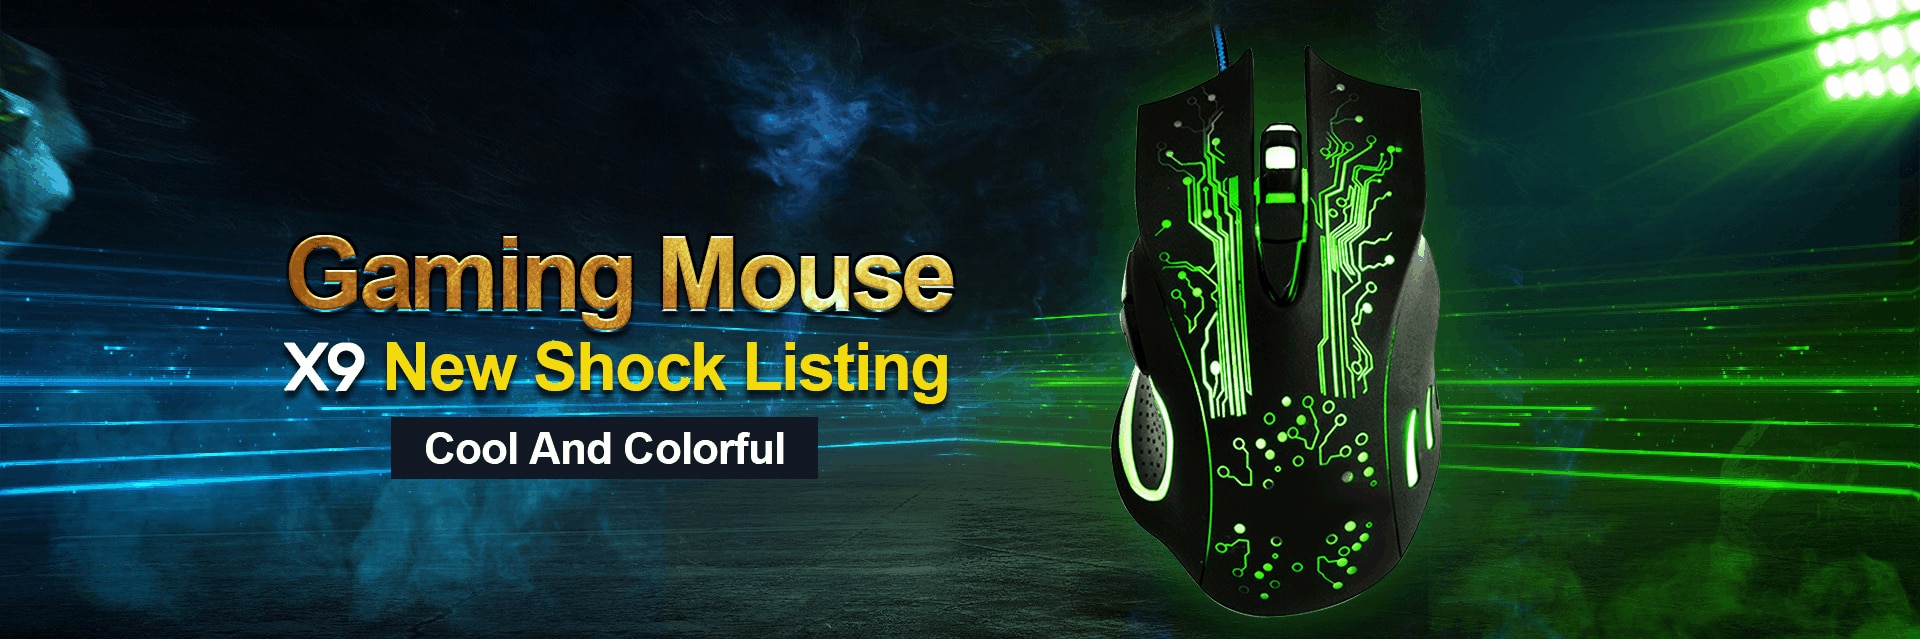 Wired Gaming Mouse Silent Game Mouse Gamer Cable USB 6 Buttons Ergonomic Mice Colorful LED Optical Mause For PC Computer game X9